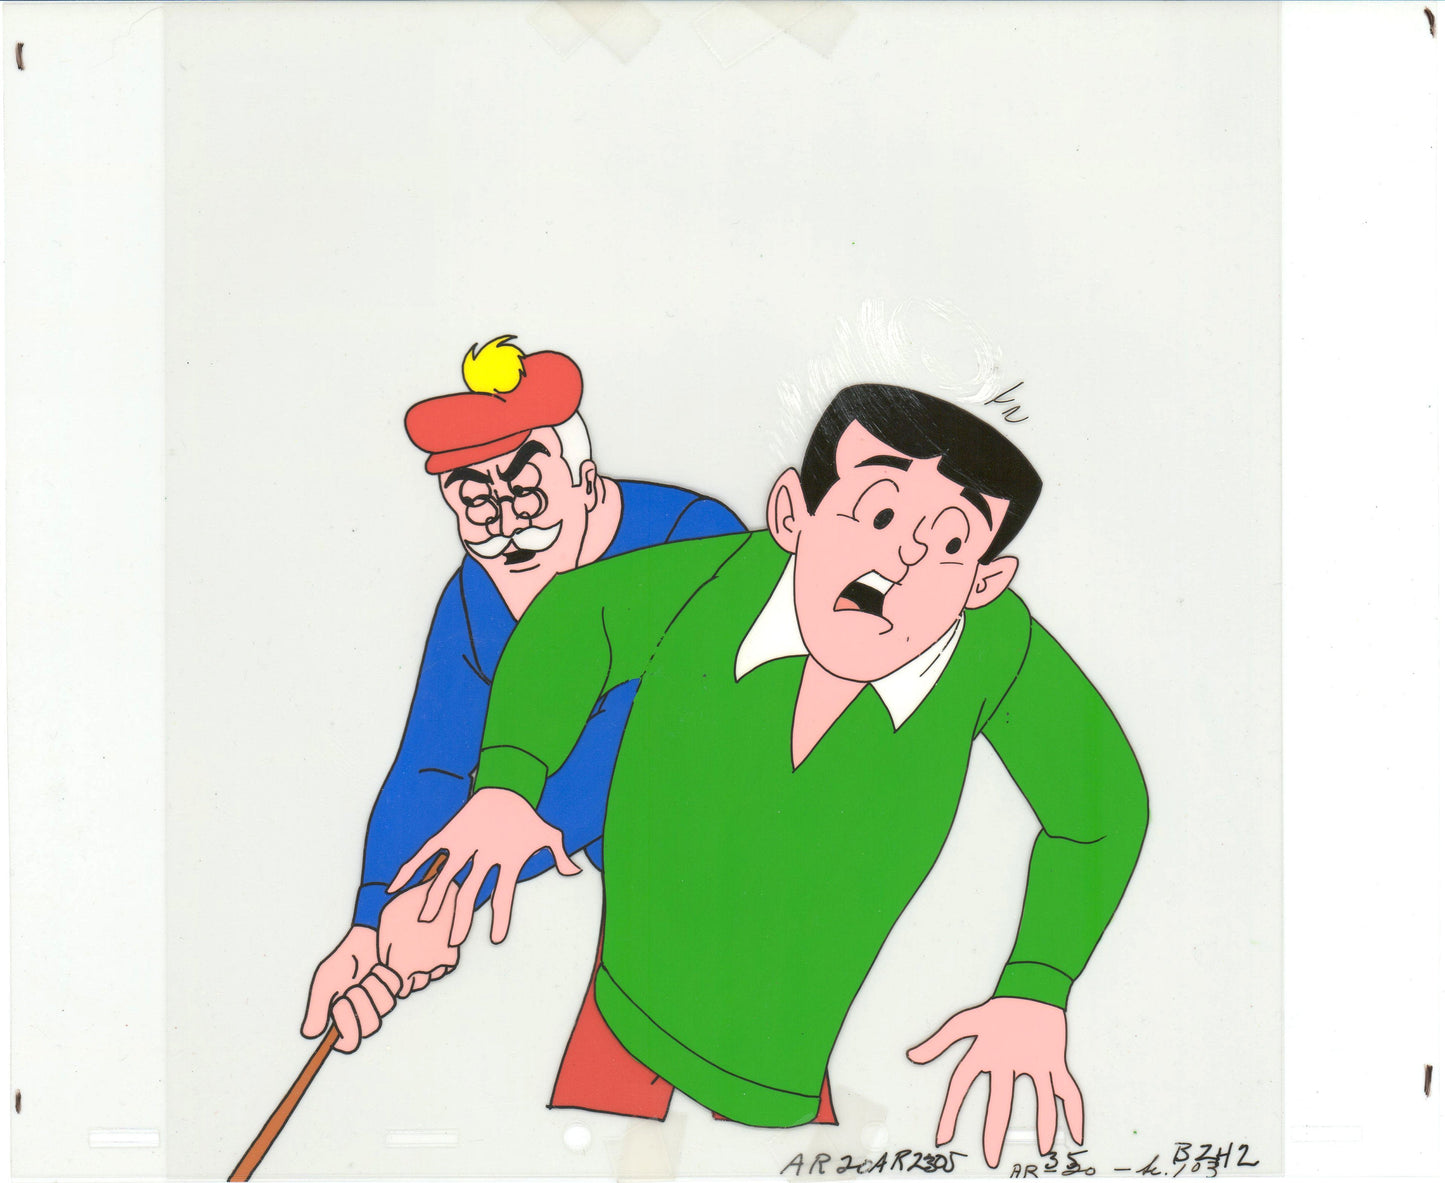 Archie Production Animation Art Cel Setup from Filmation 1968-1969 b2028